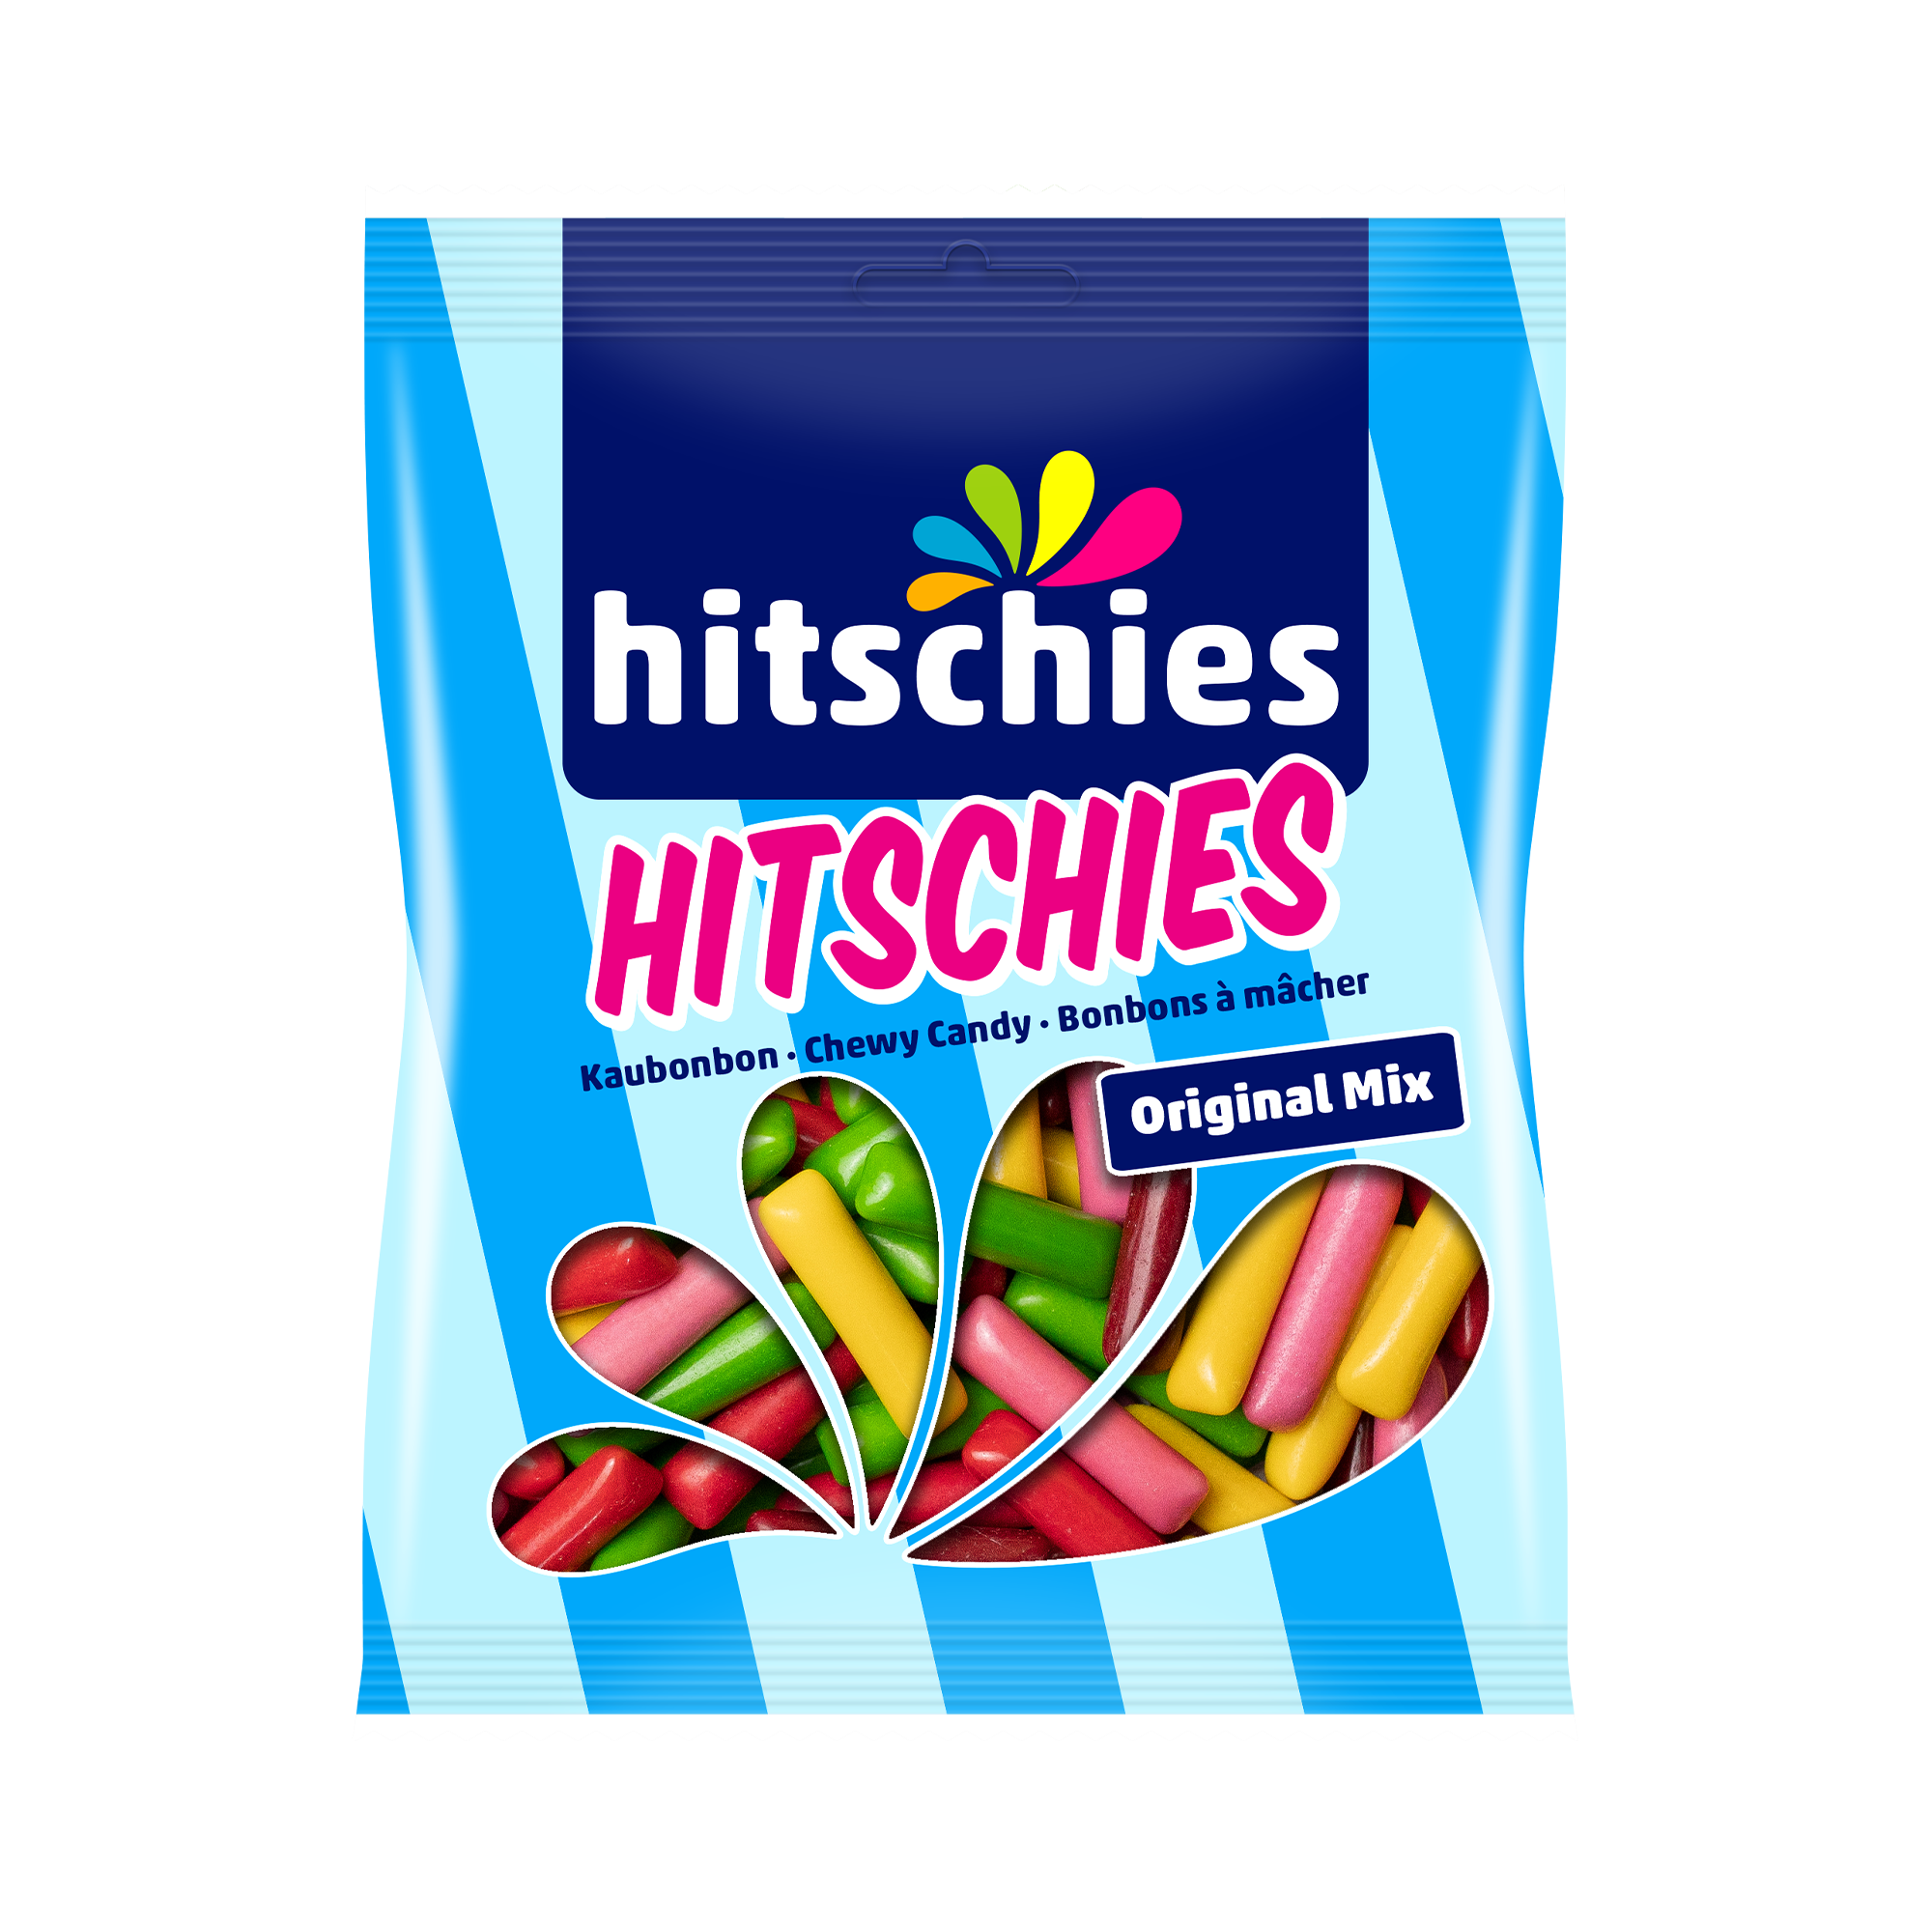 4x bags Hitschler Hitschies Original Mix fruit chews 🍬 TRACKED SHIPPING ✈